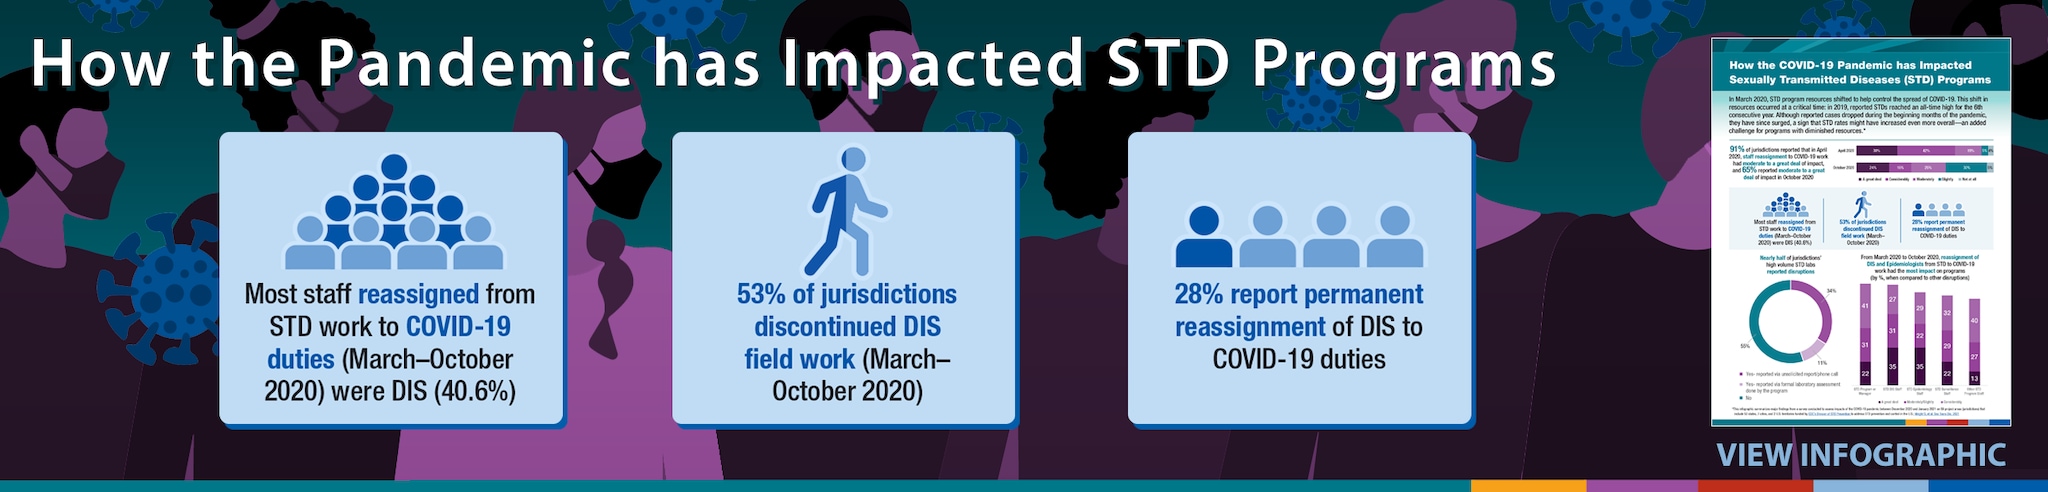 How the Pandemic has Impacted STD Programs